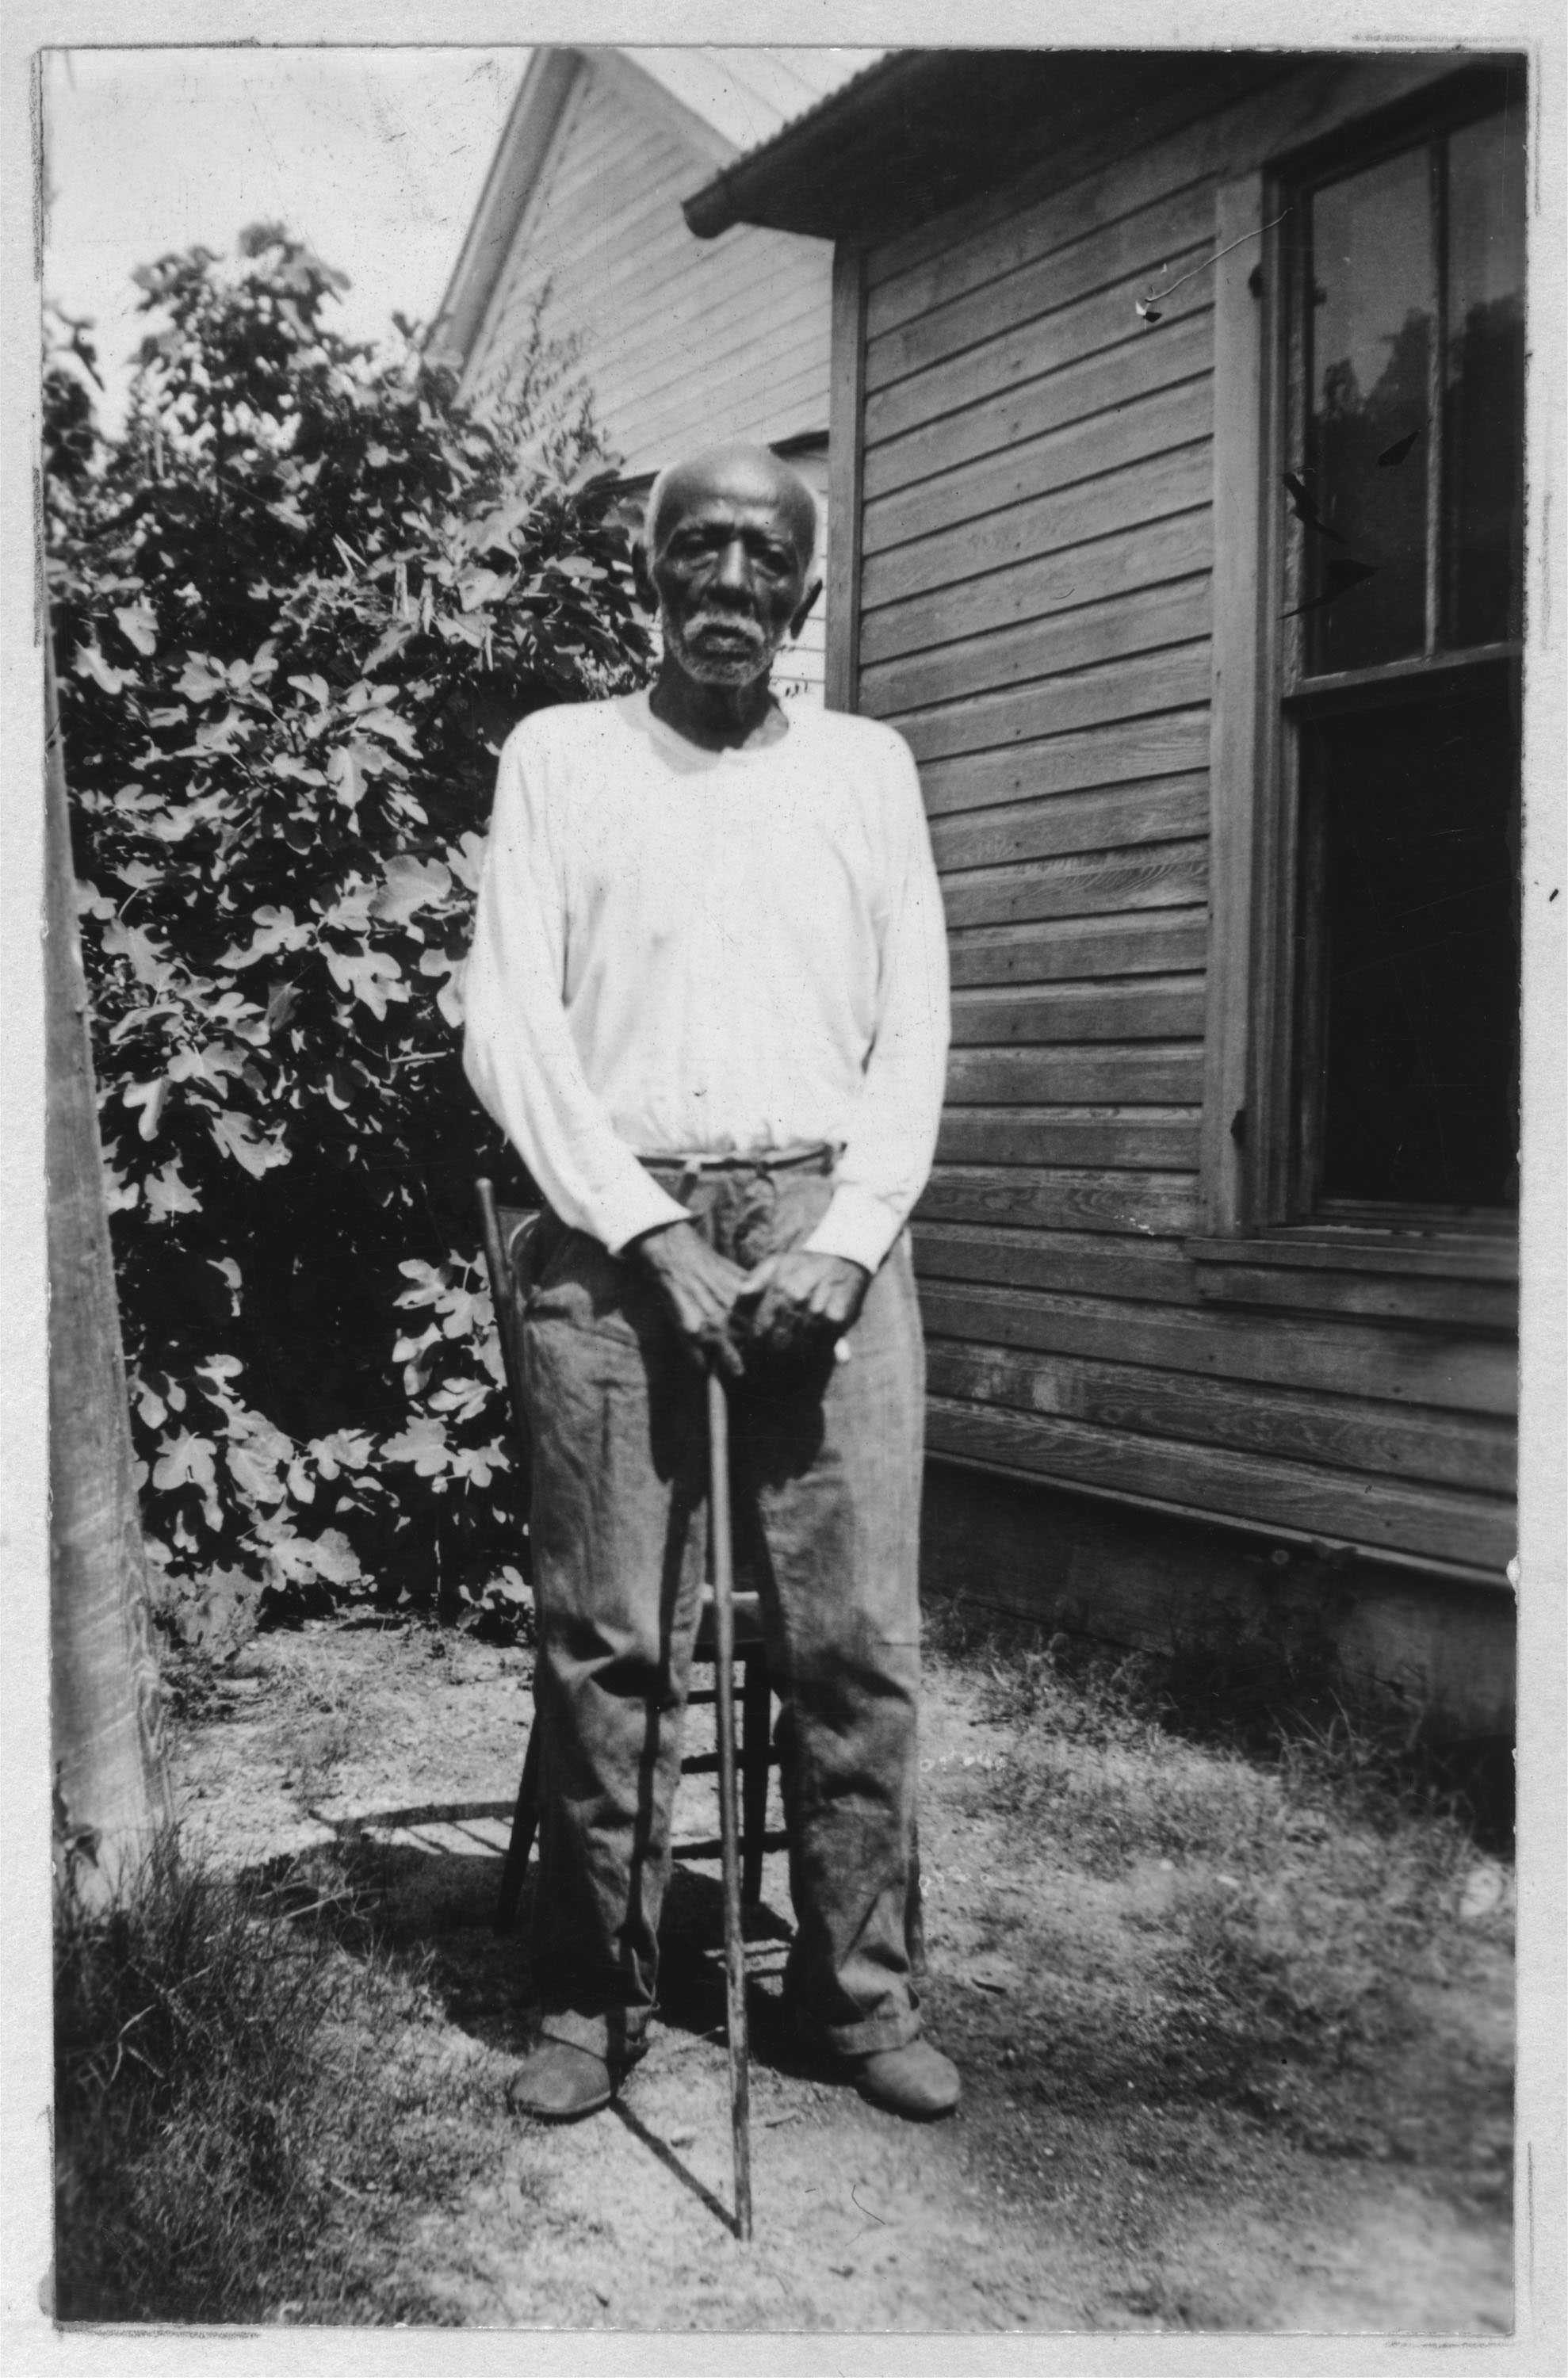 A black and white portrait of Martin Jackson, standing with a cane. He is wearing a white long sleeved shirt.